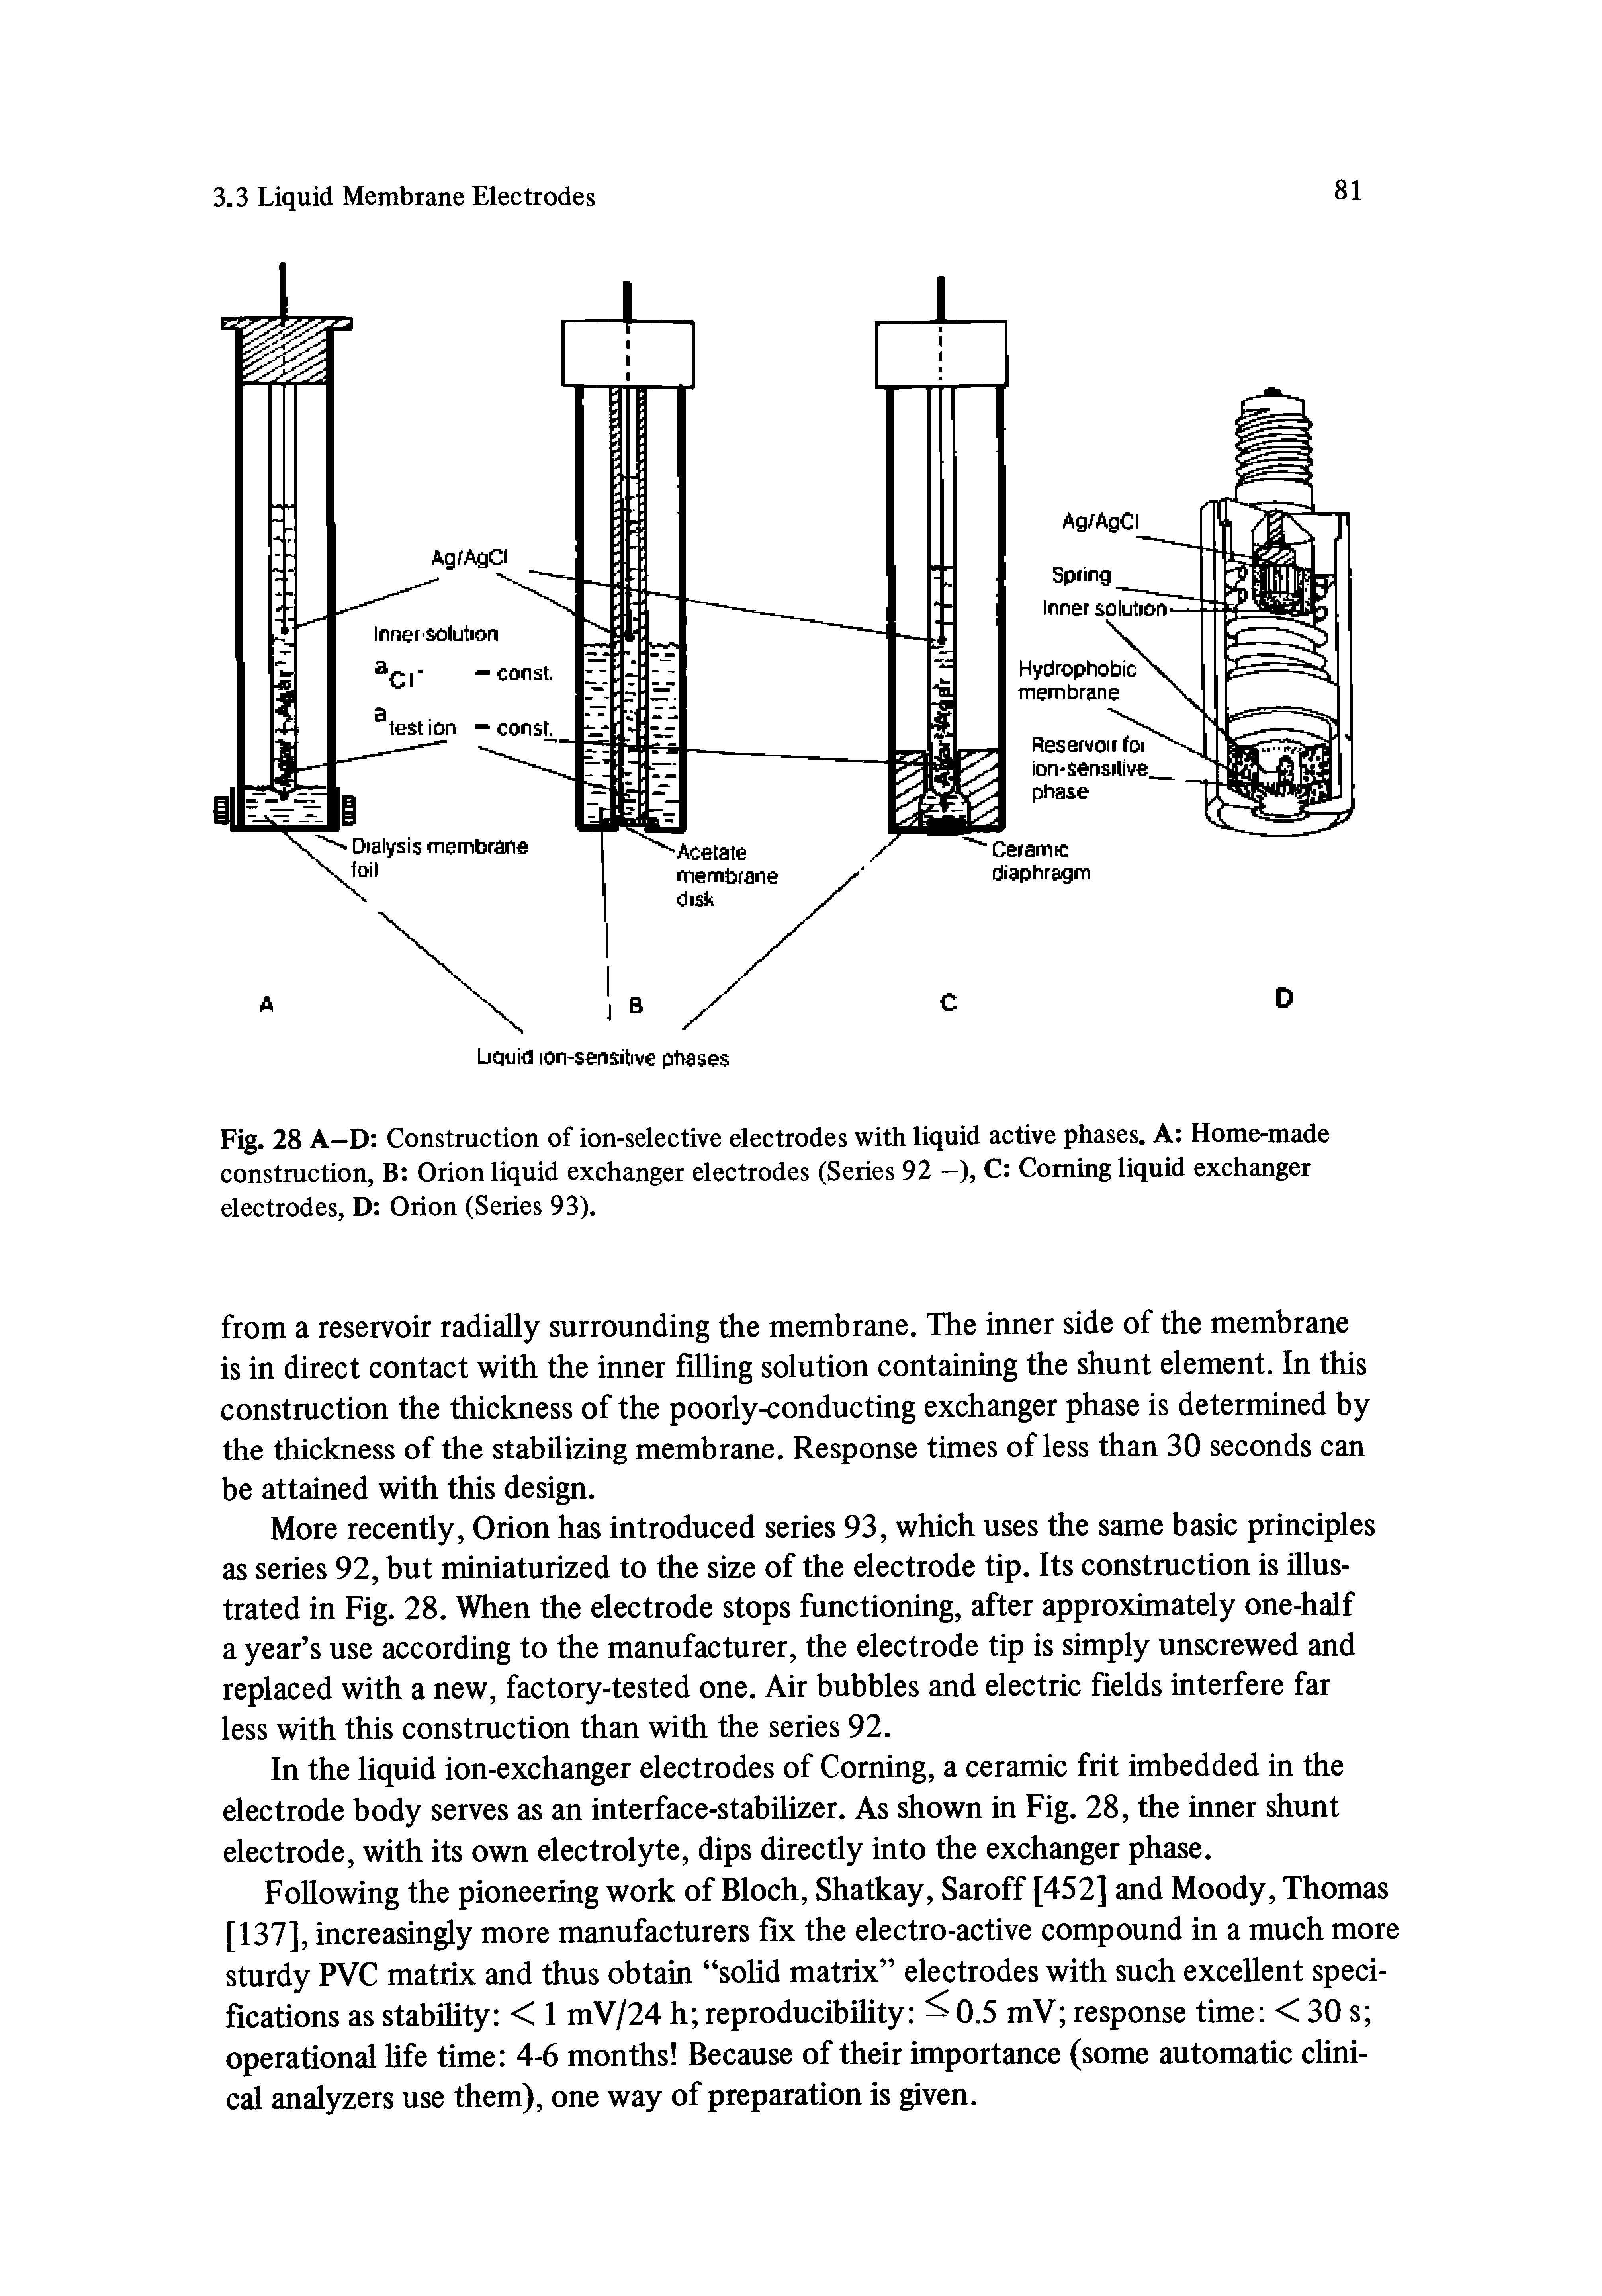 Fig. 28 A-D Construction of ion-selective electrodes with liquid active phases. A Home-made construction, B Orion liquid exchanger electrodes (Series 92 -), C Coming liquid exchanger electrodes, D Orion (Series 93).